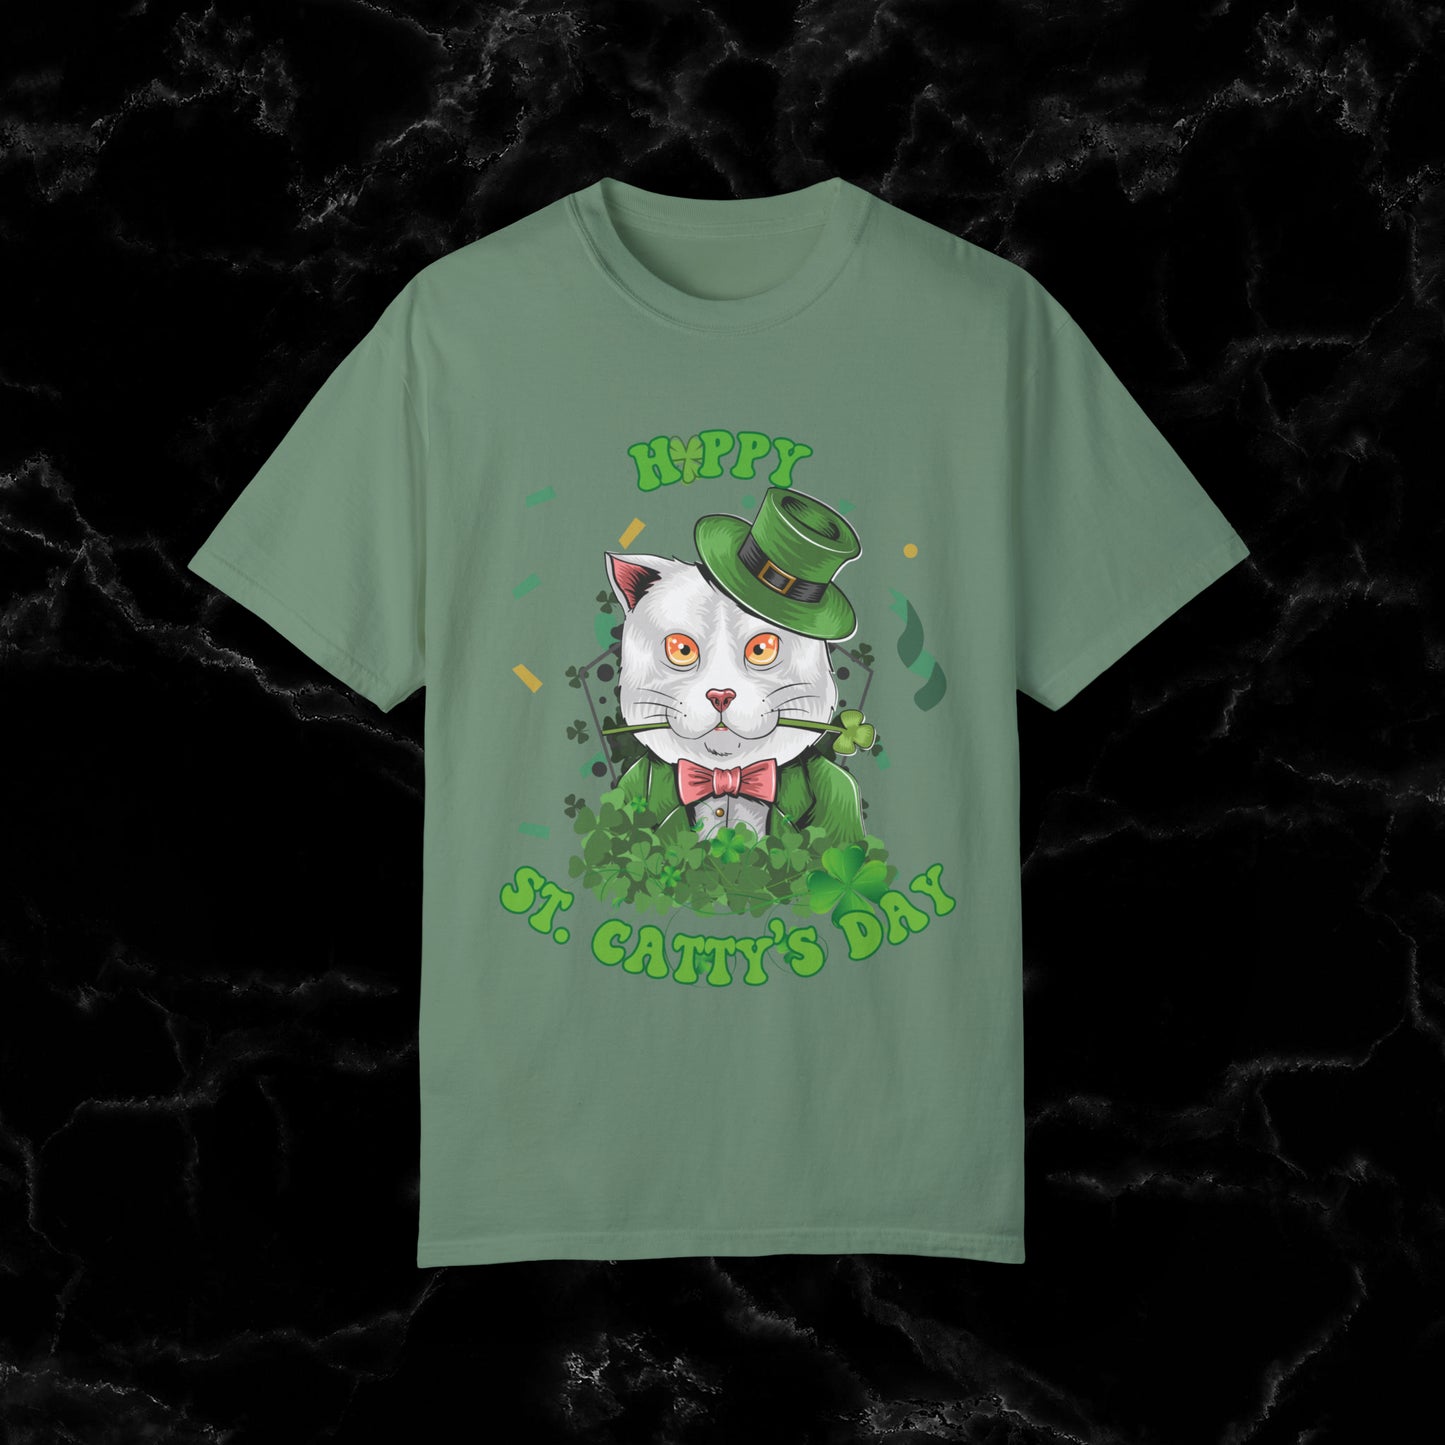 Happy St. Catty's Day Funny St. Patrick's Day Comfort Colors T-Shirt - St. Paddy's Day Shirt for Cat Lover St. Patty's Day Fun T-Shirt Light Green S 